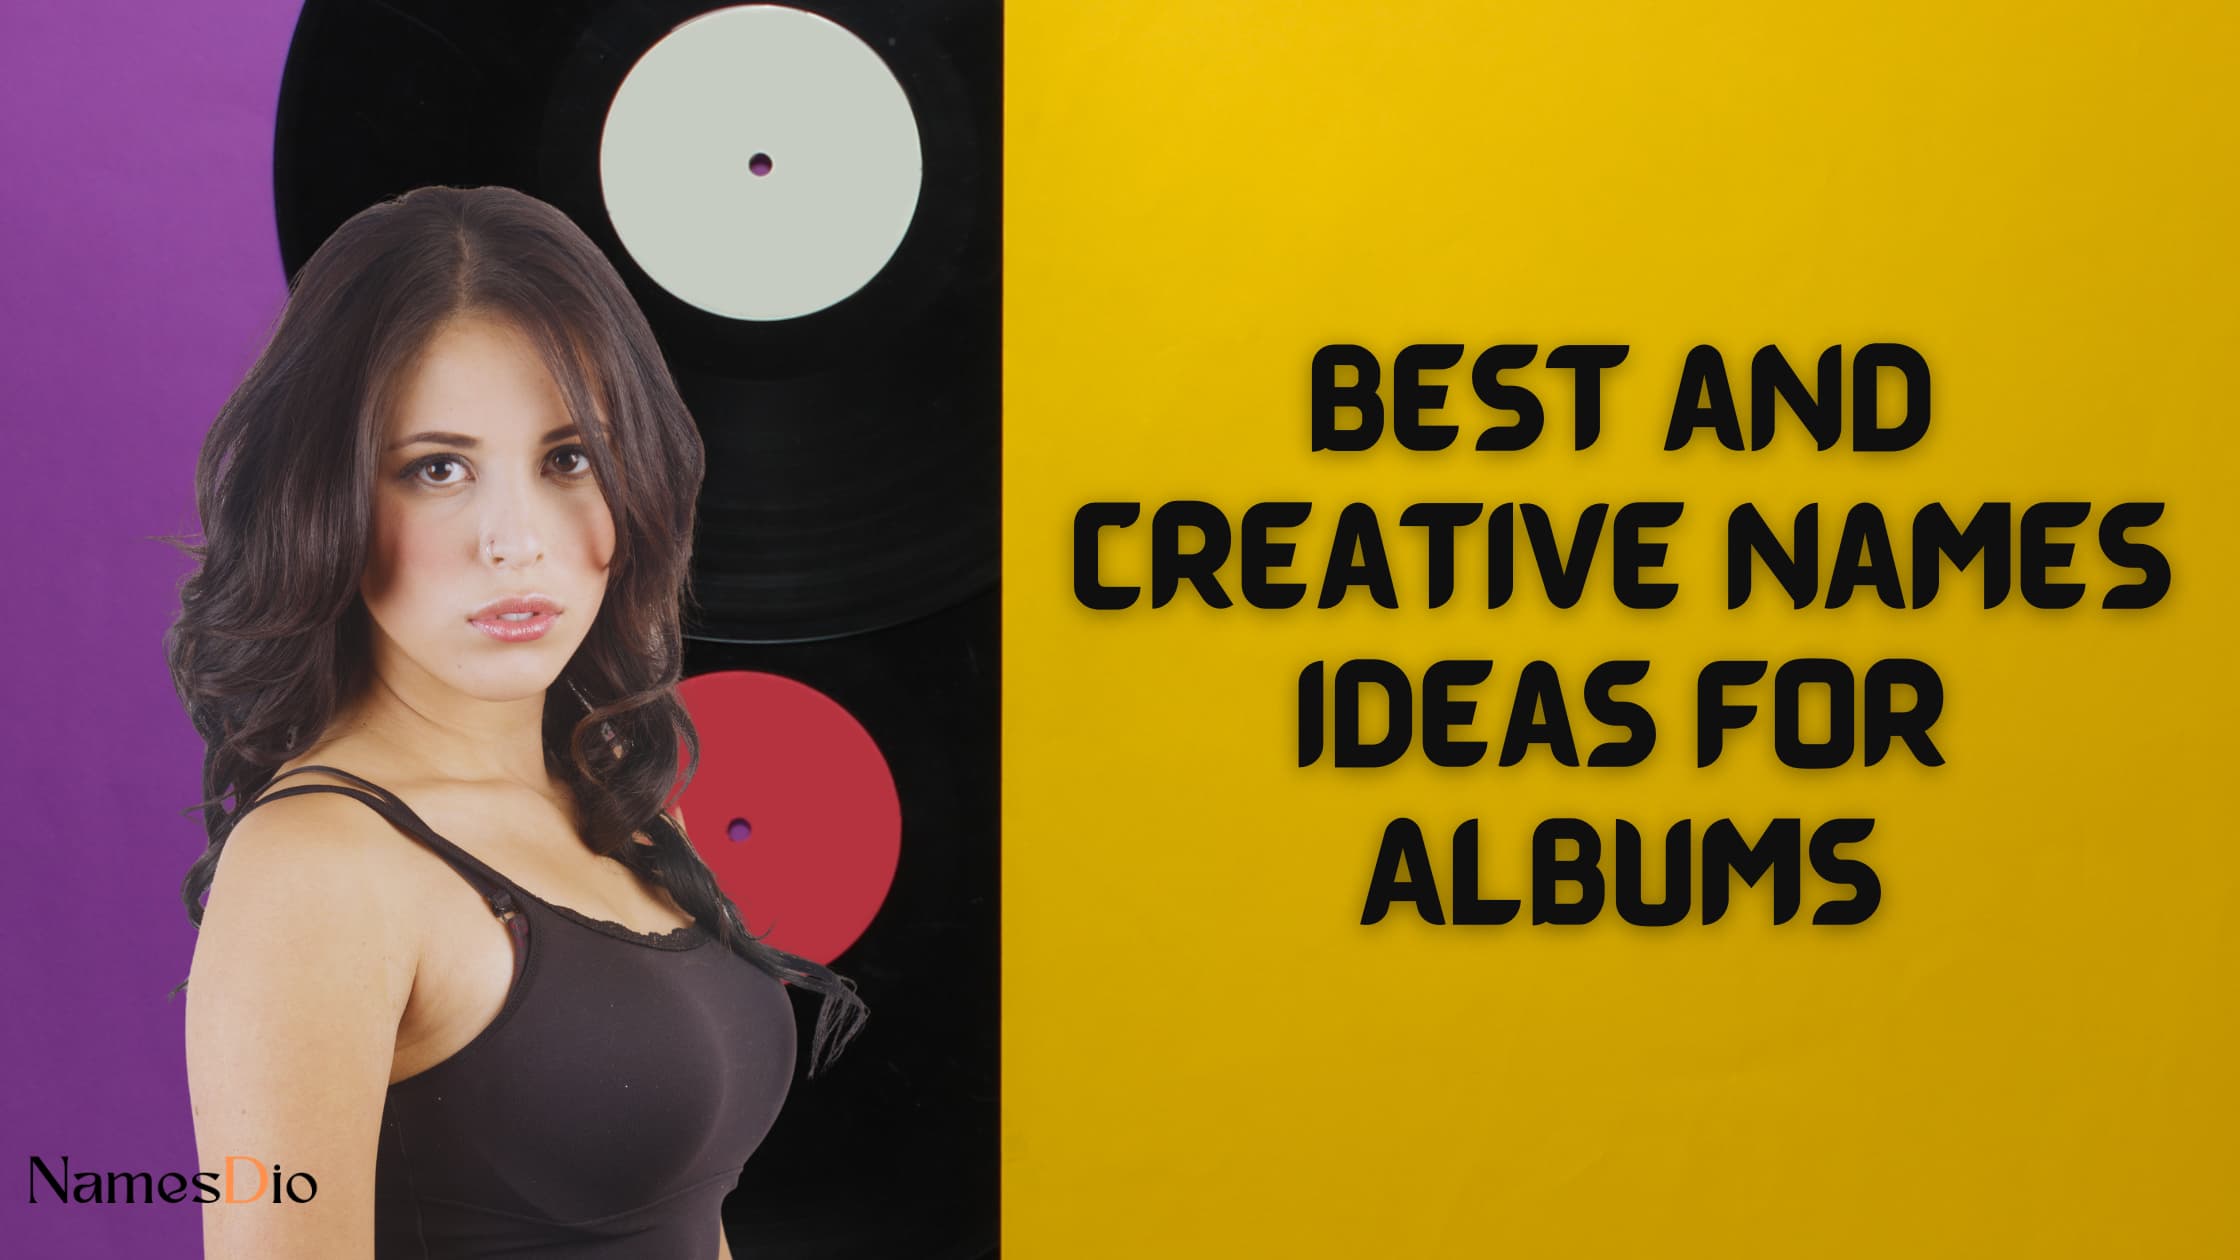 Best-and-Creative-Names-Ideas-for-Albums